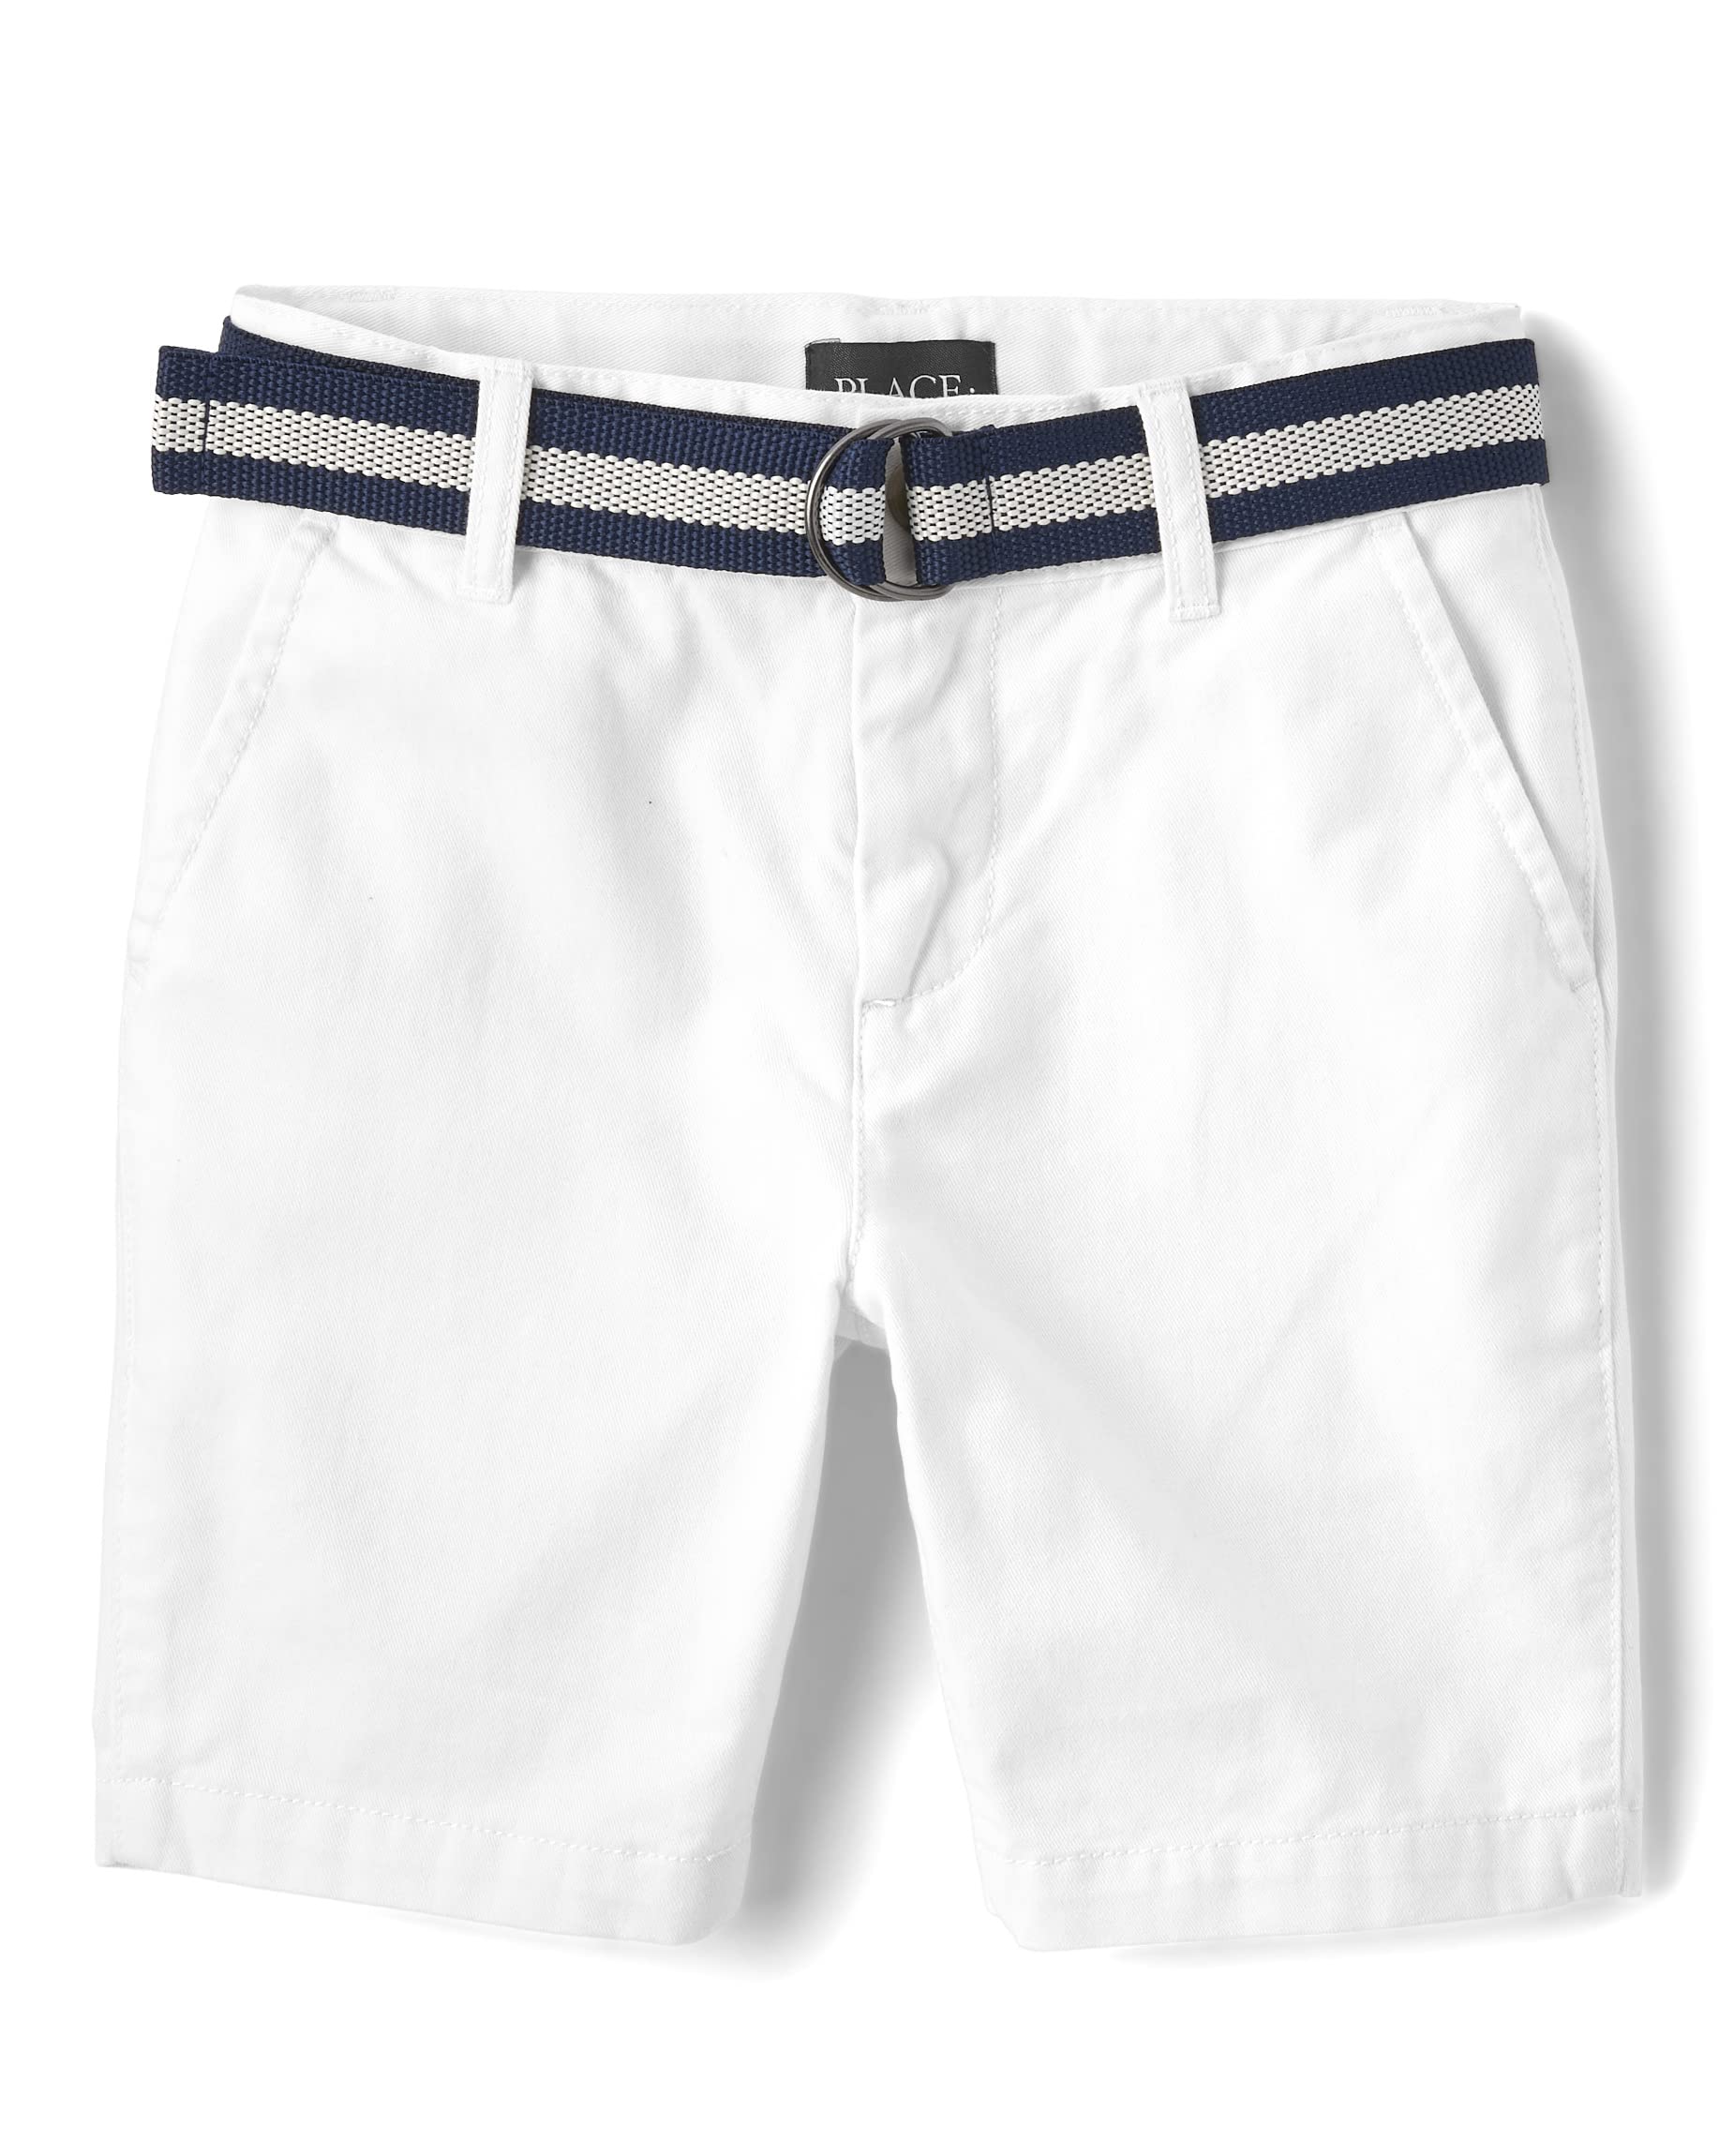 The Children's Place Boys' Belted Chino Shorts